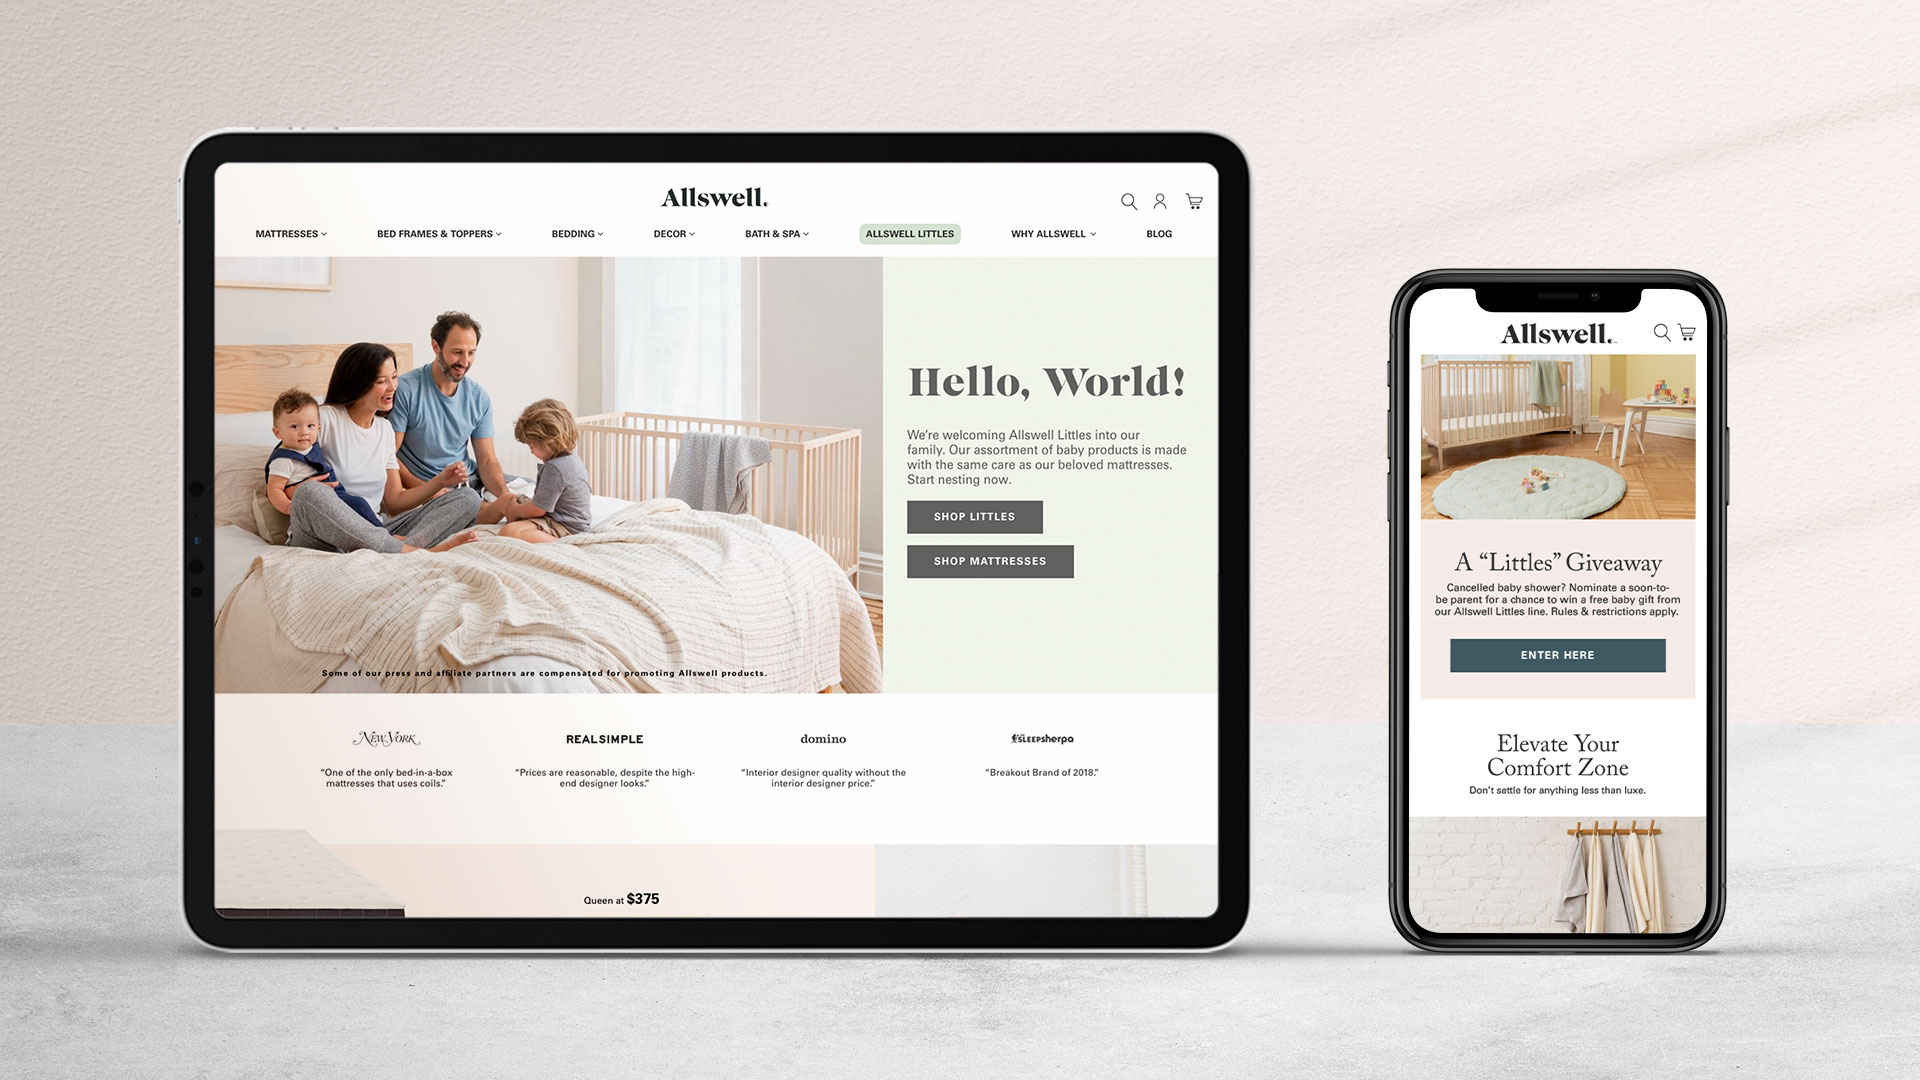 allswell-by-walmart-featured-work-